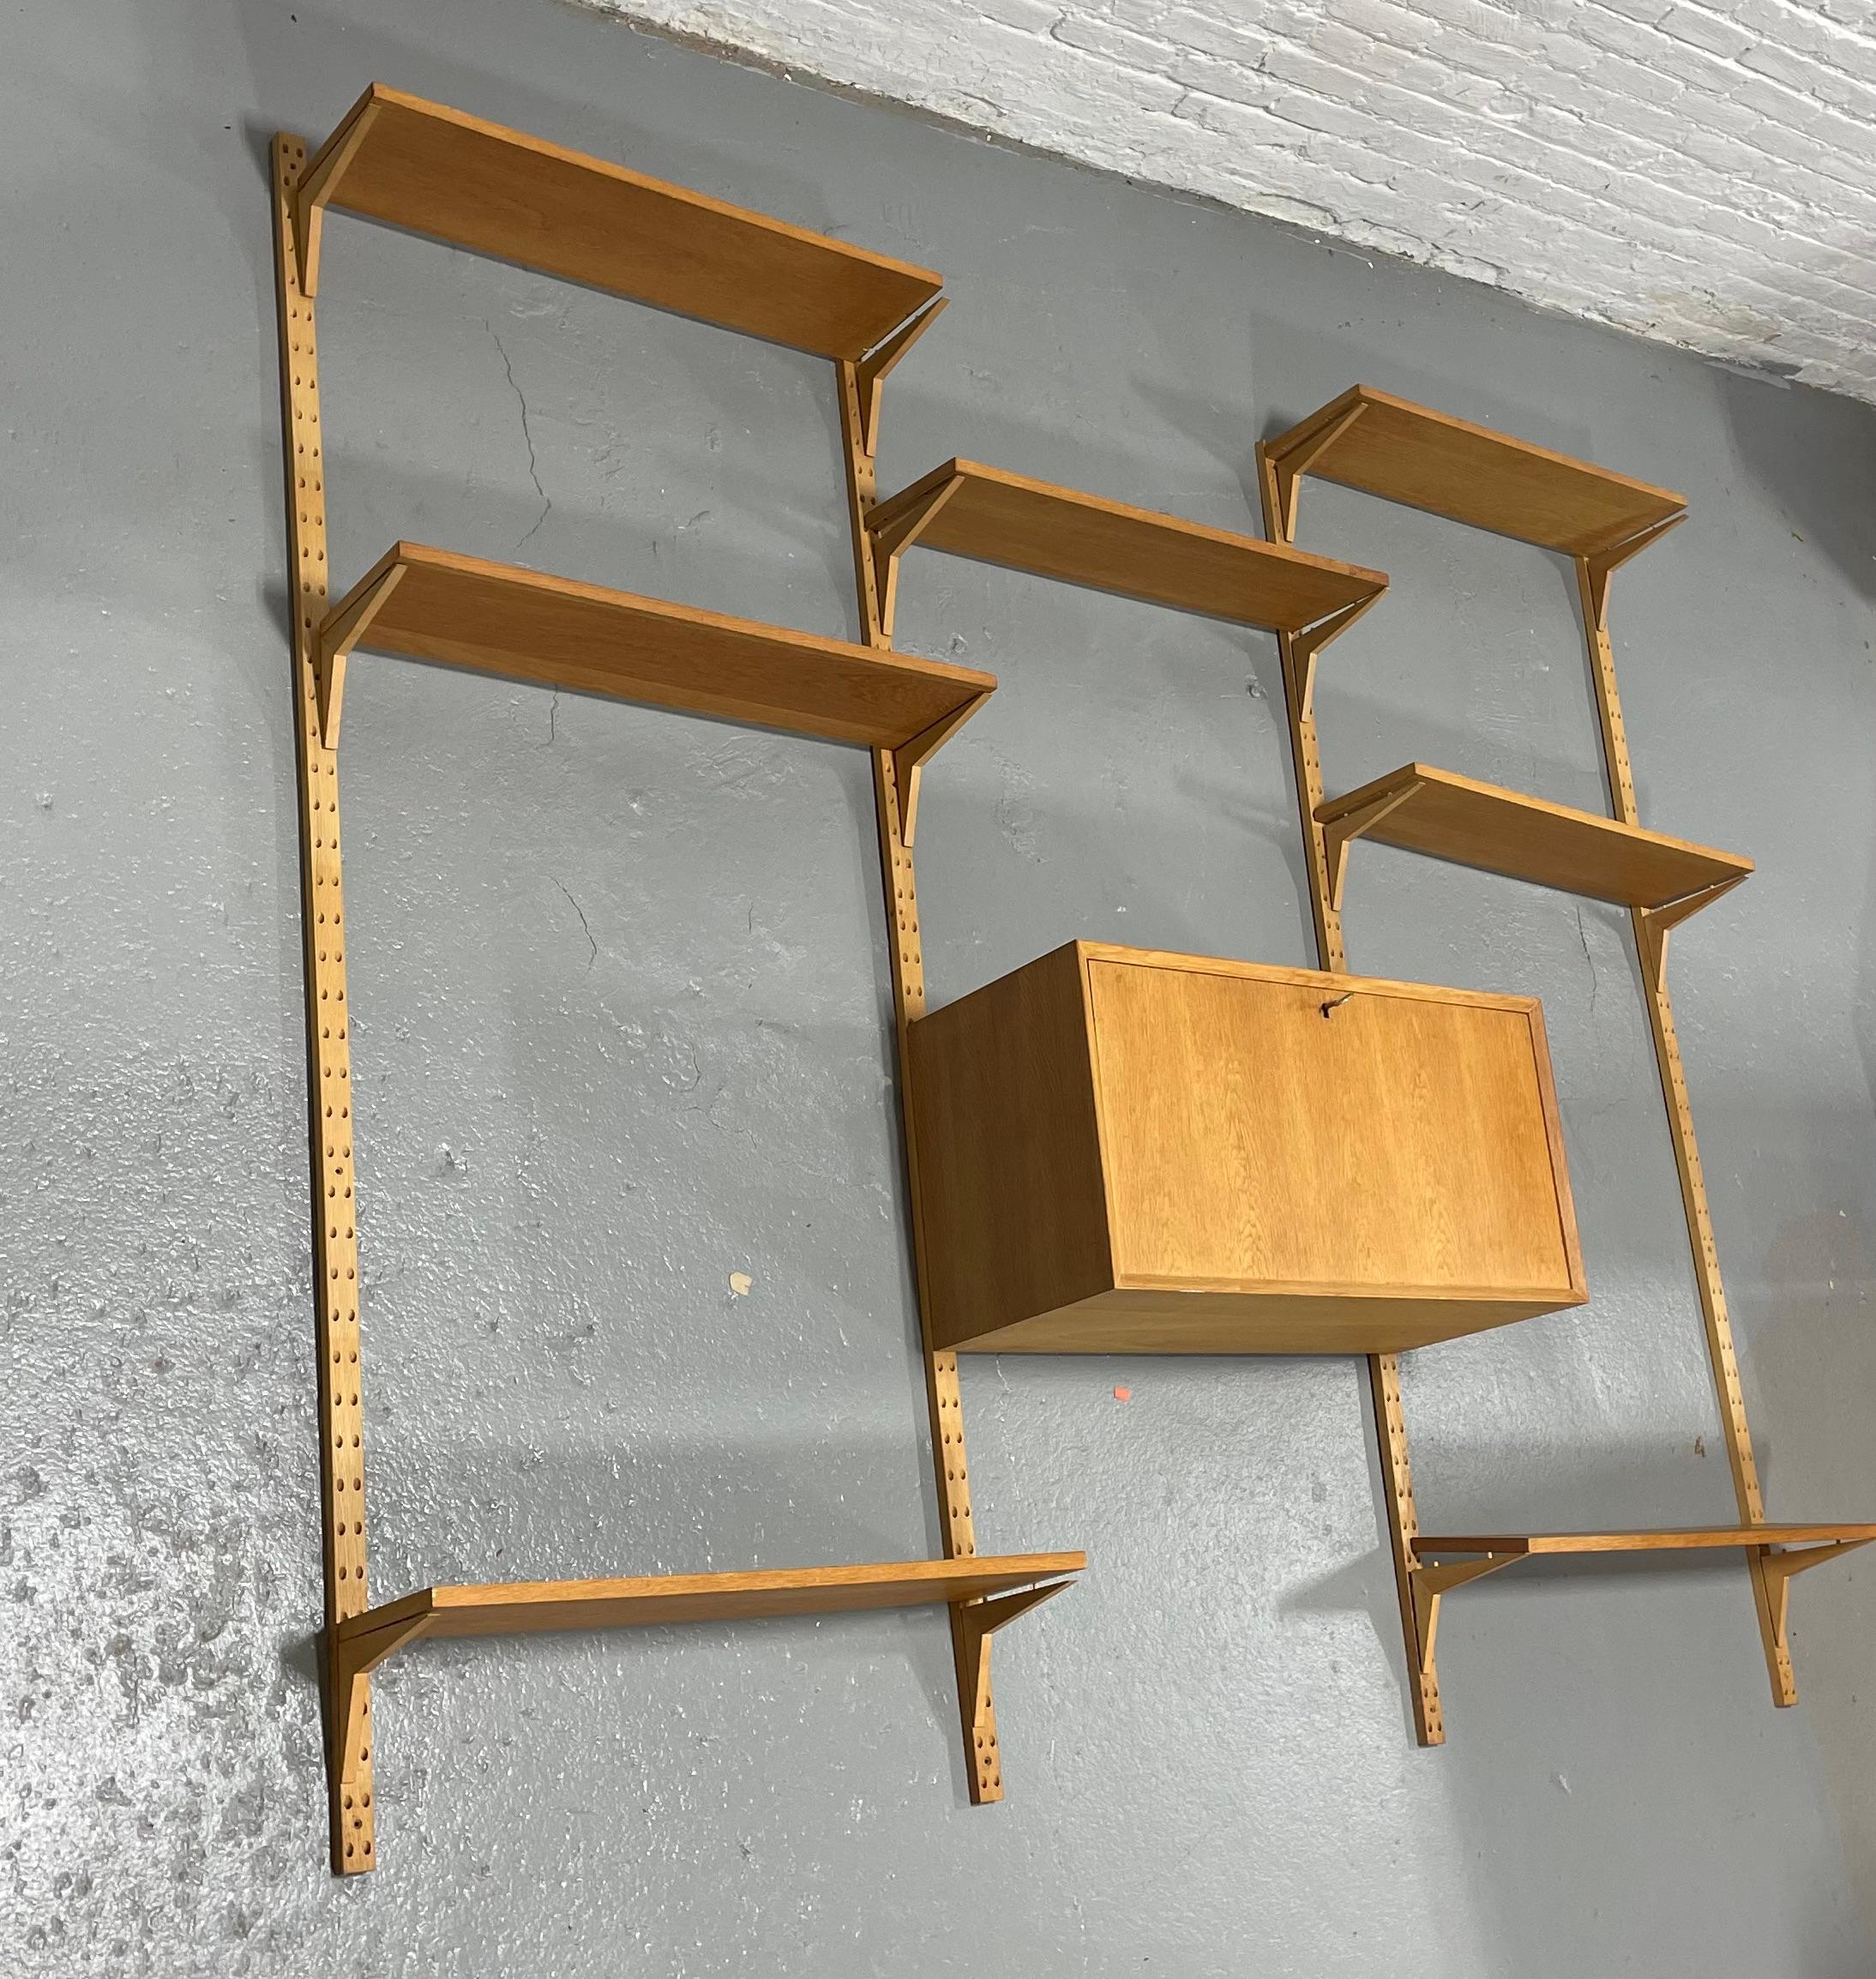 Original Danish Modern Mid Century Cado Wall Unit / Shelving System in hard to find light oak, c. 1960's. Great three bay unit consisting of seven shelves  and one cabinet that can be arranged anywhere on the rails. The cabinet has removable